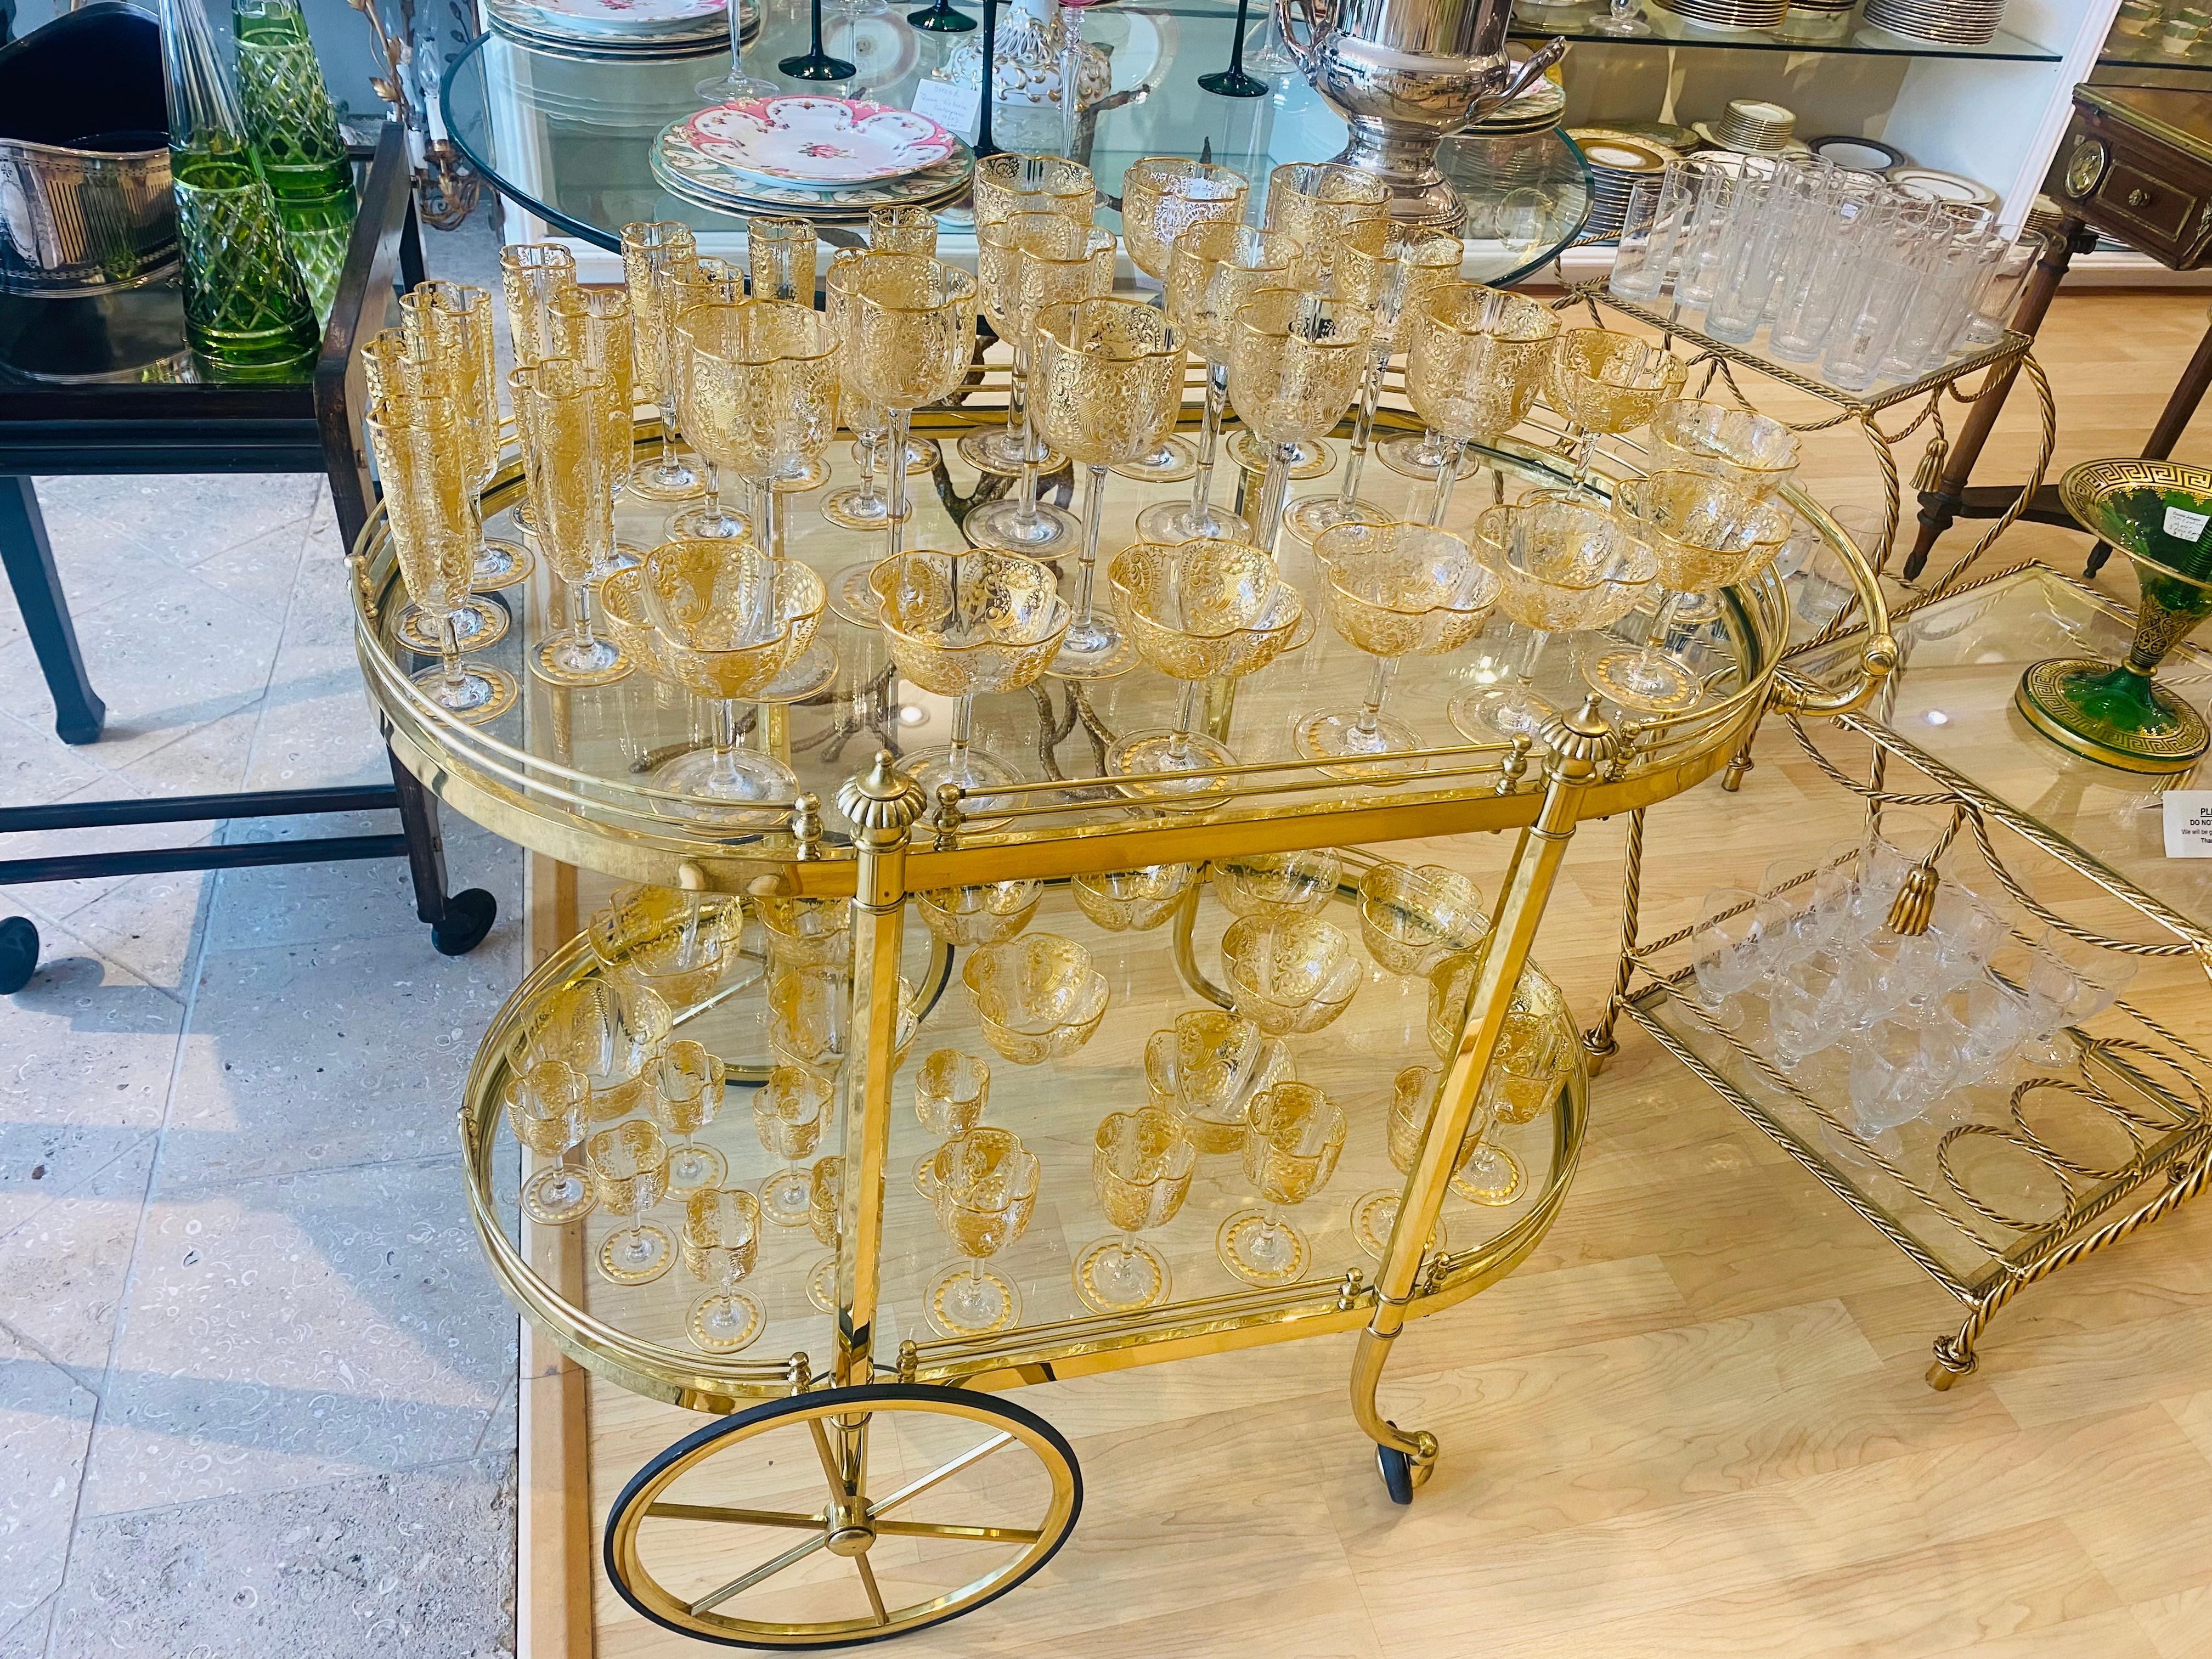 So nice to have over 50 pieces of beautifully blown quatre foil shaped crystal serve ware. By the re known firm of Moser, this 19th century set features delicate cut floral designs with their unique shape. Accented with lots of 24 karat gold